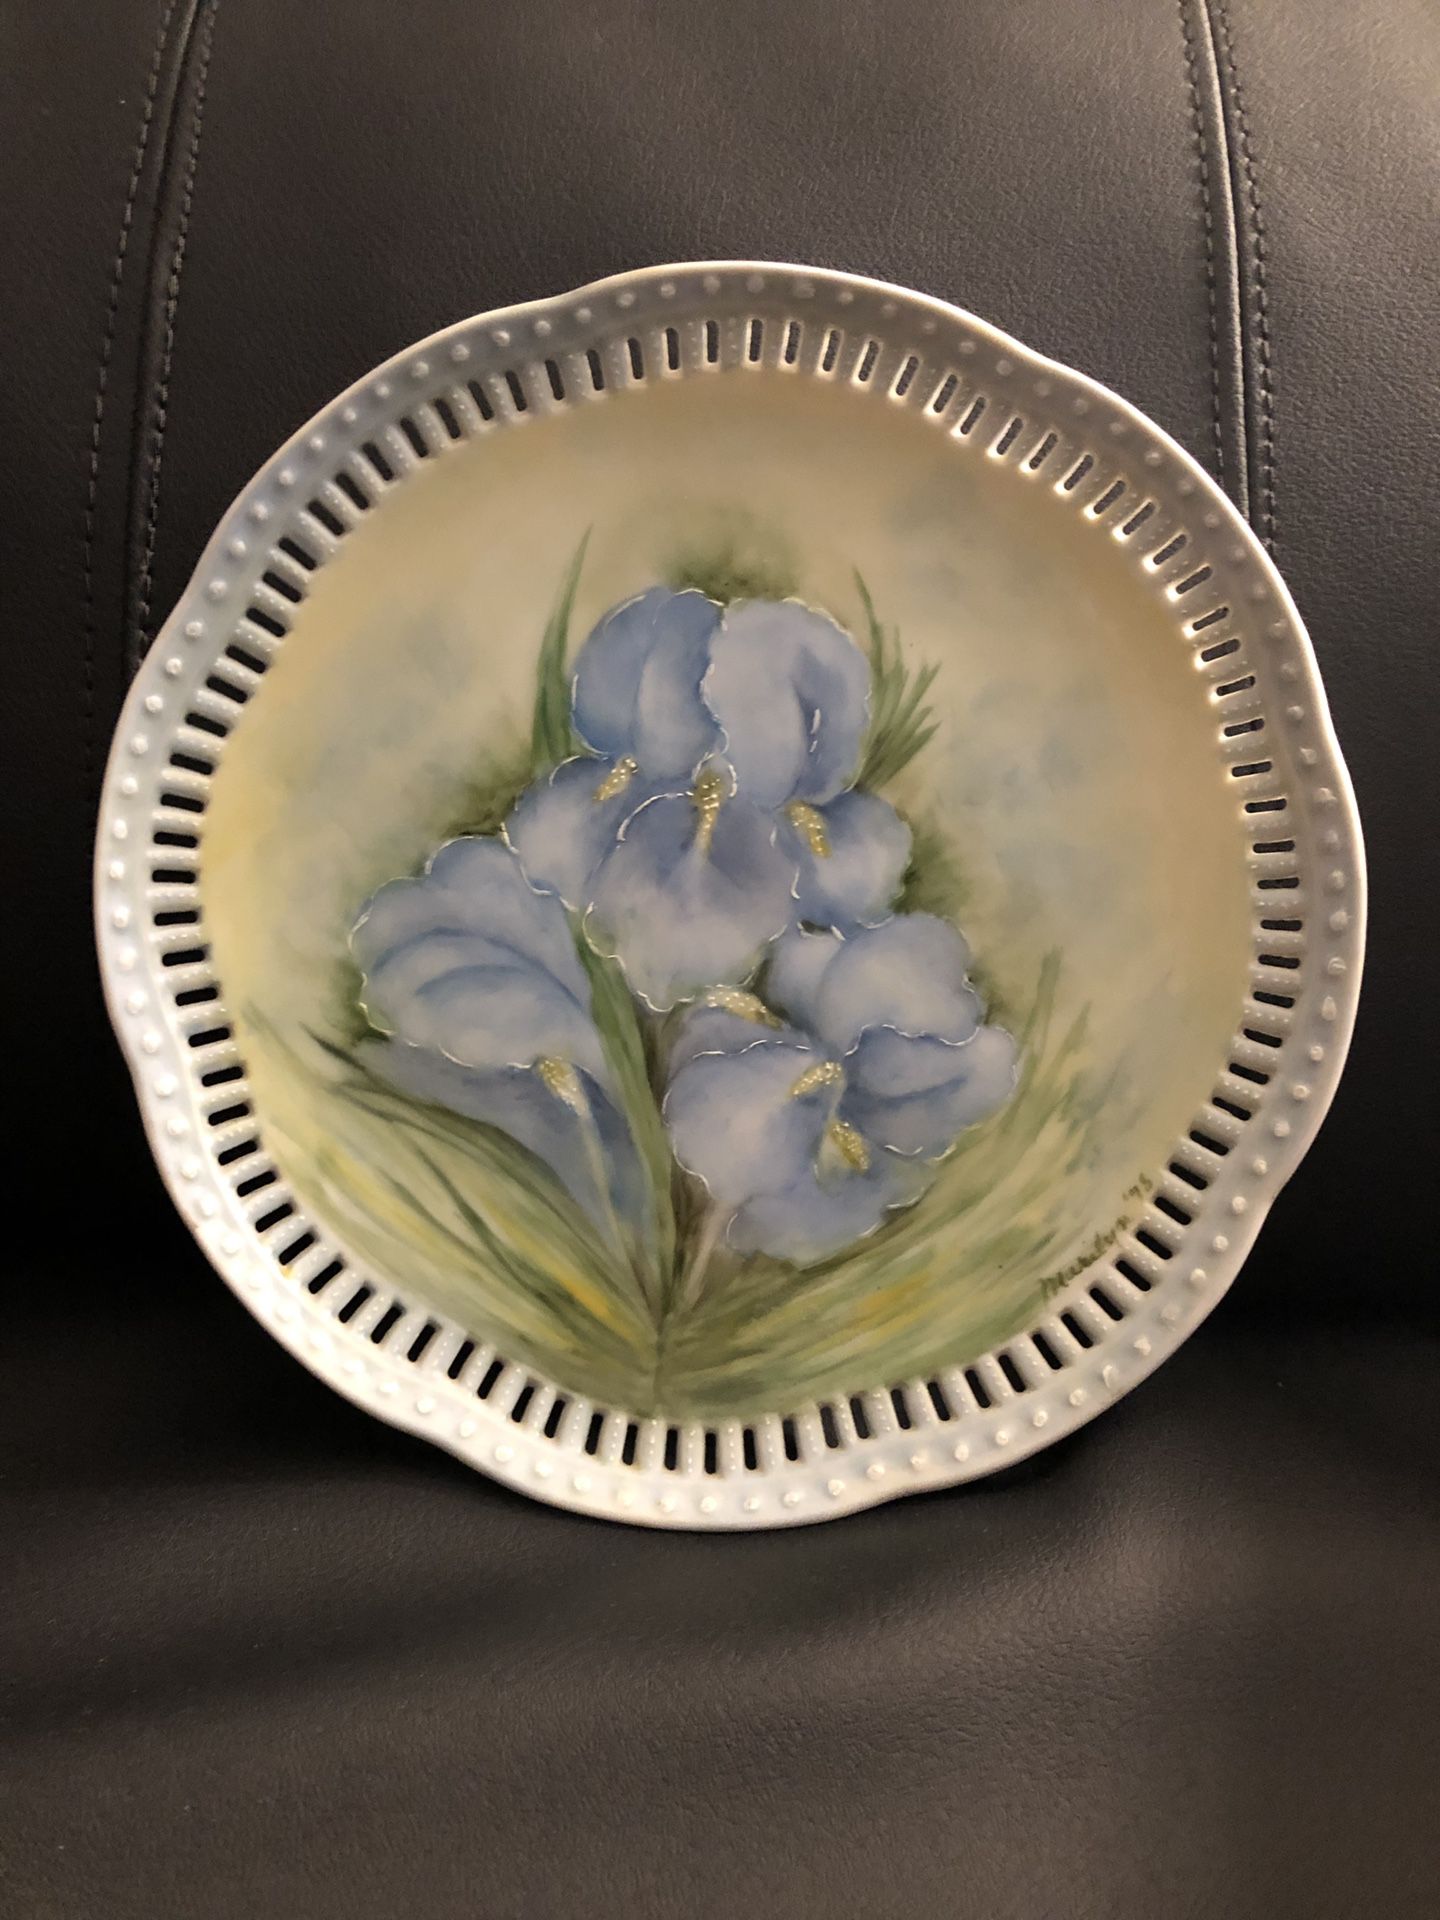 Floral Reticulated Hand Painted Plate Signed By Artist “Marilyn” 1978 - Pierced